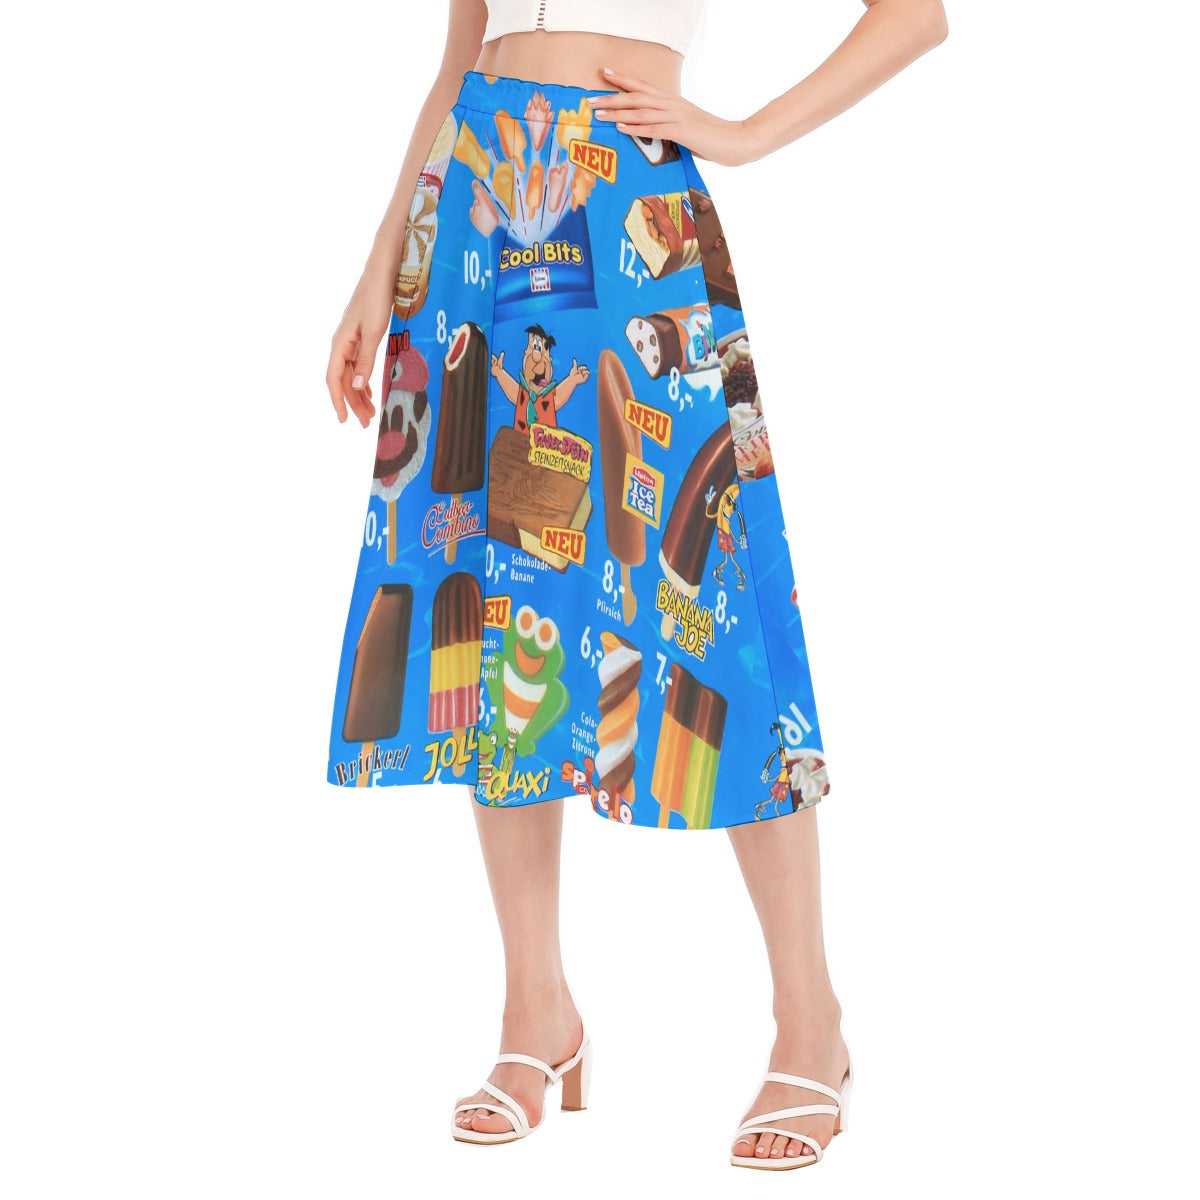 Enchanting summer skirt perfect for beach outings and casual wear